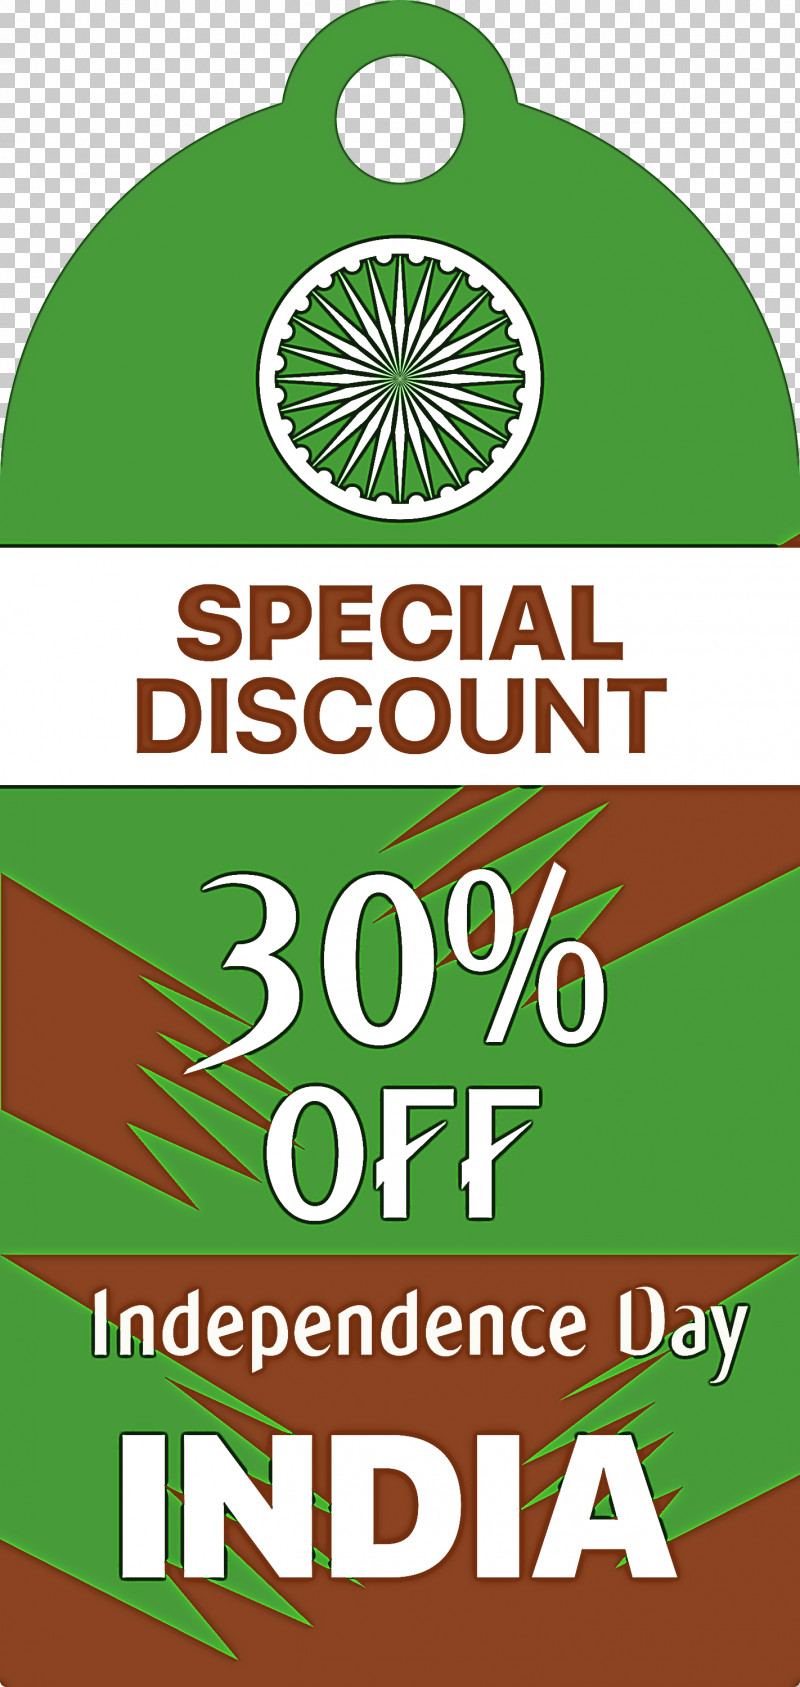 India Indenpendence Day Sale Tag India Indenpendence Day Sale Label PNG, Clipart, Green, India, India Indenpendence Day Sale Label, India Indenpendence Day Sale Tag, Indian Army Free PNG Download